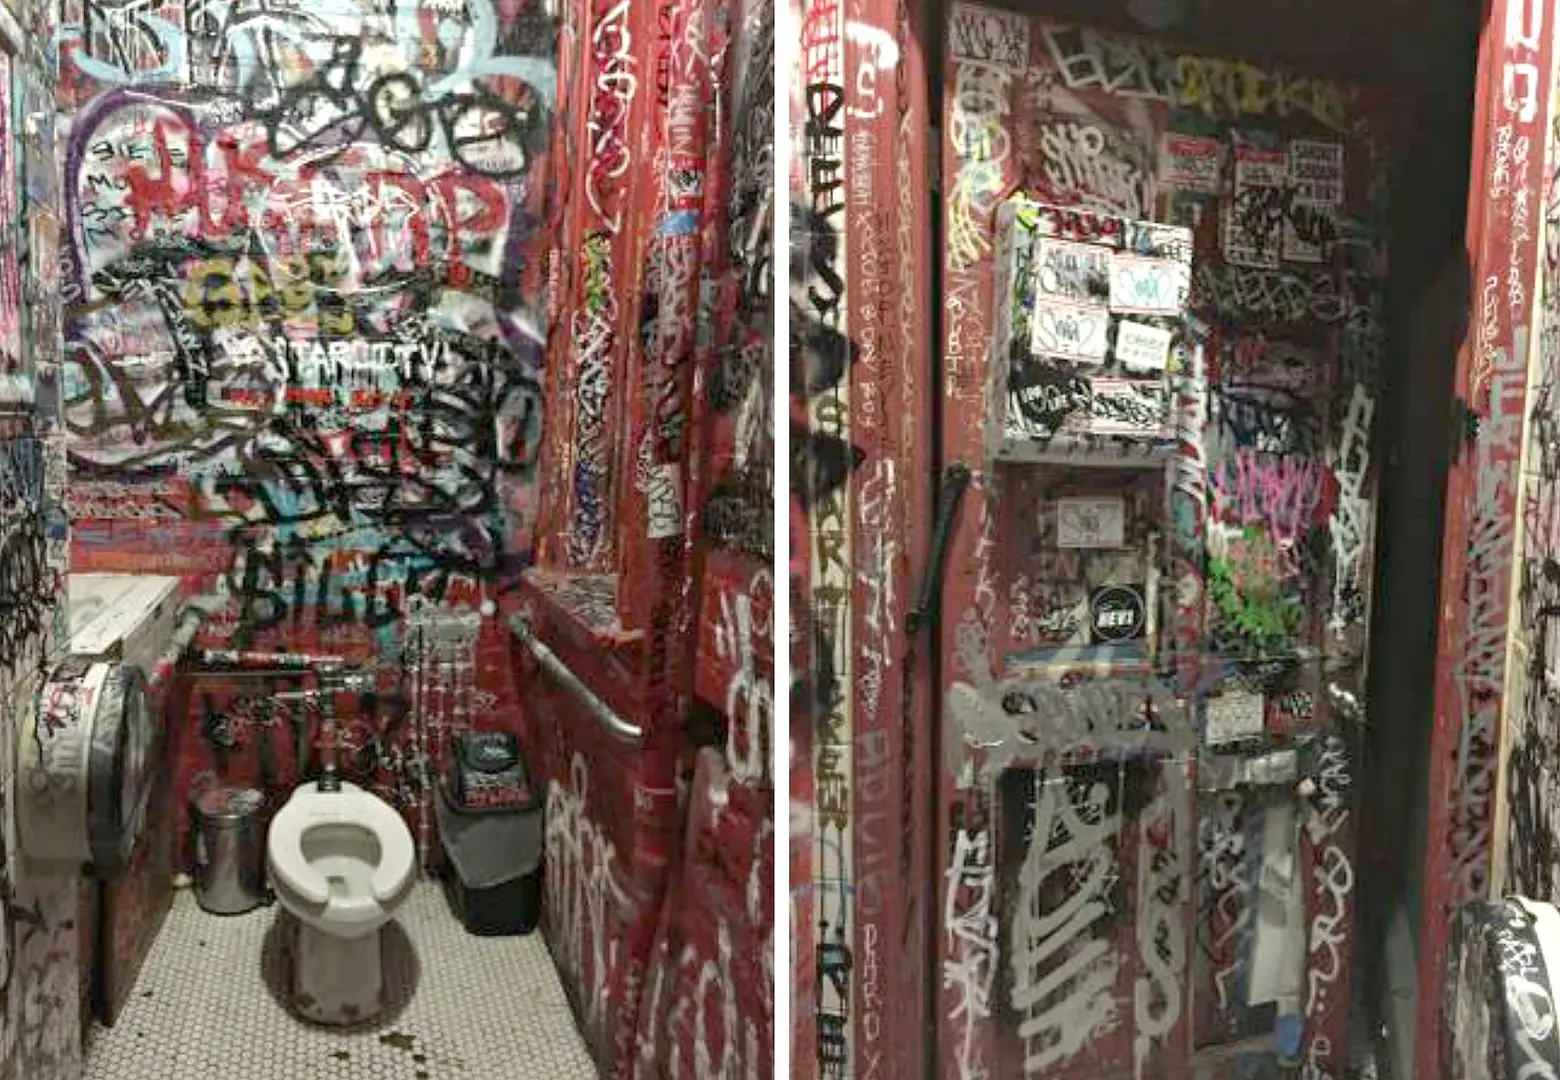 This $30/Week Grimy Lower East Side Bar Bathroom Is a Hot Ticket